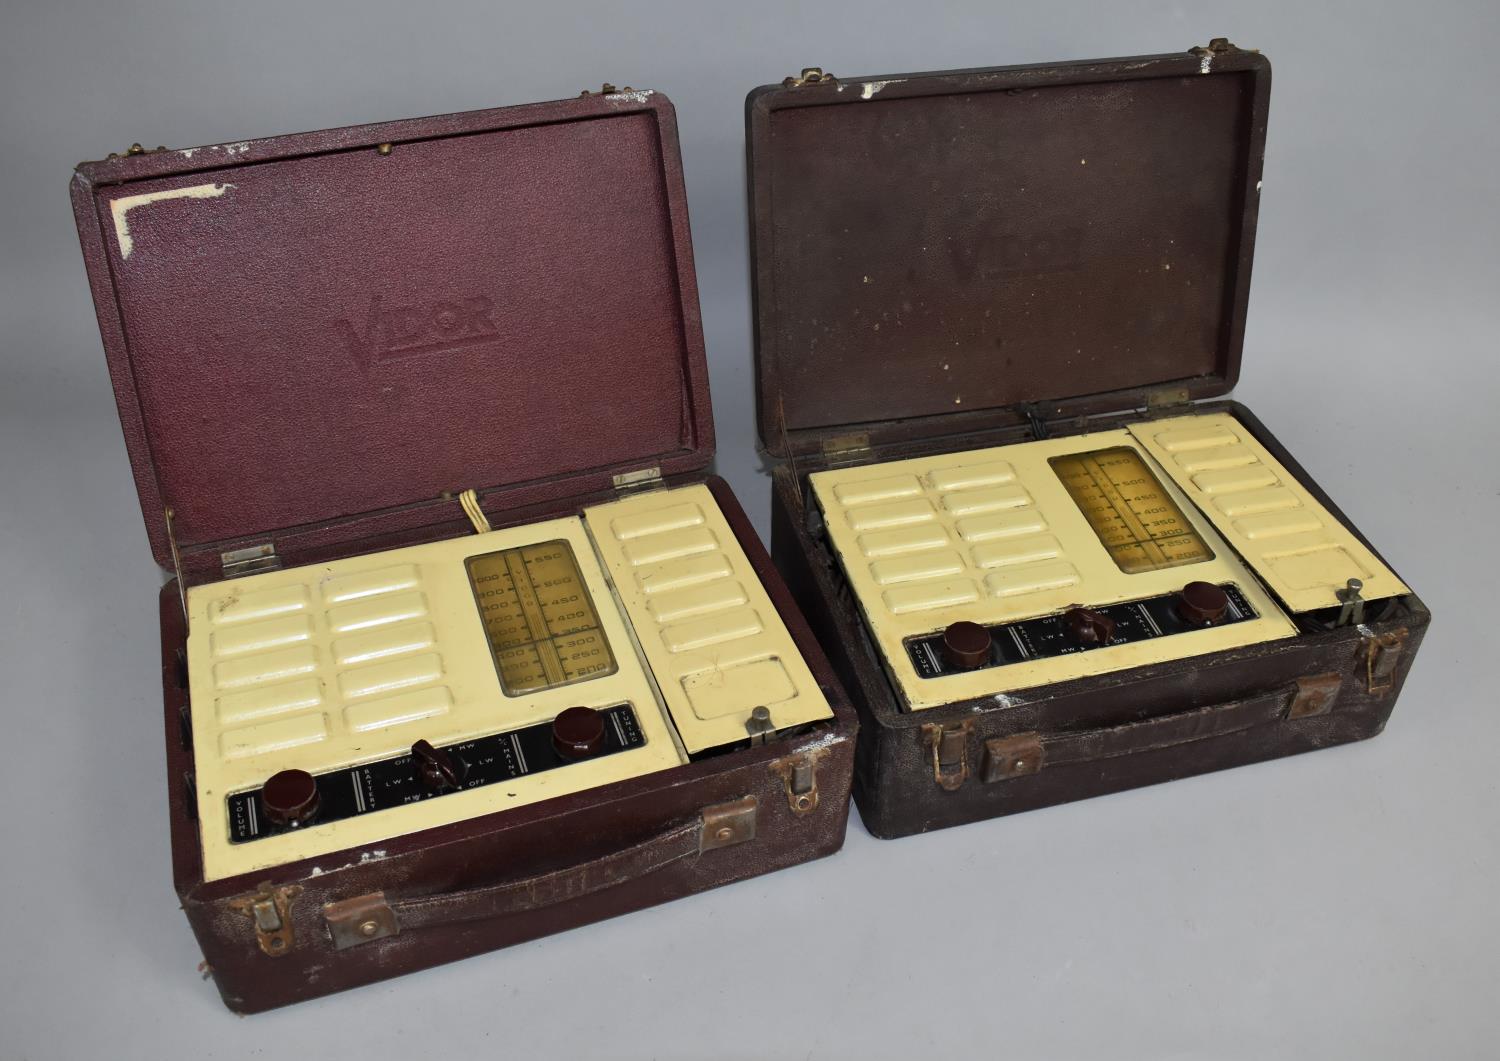 Two Vidor Travel Radios in Cases